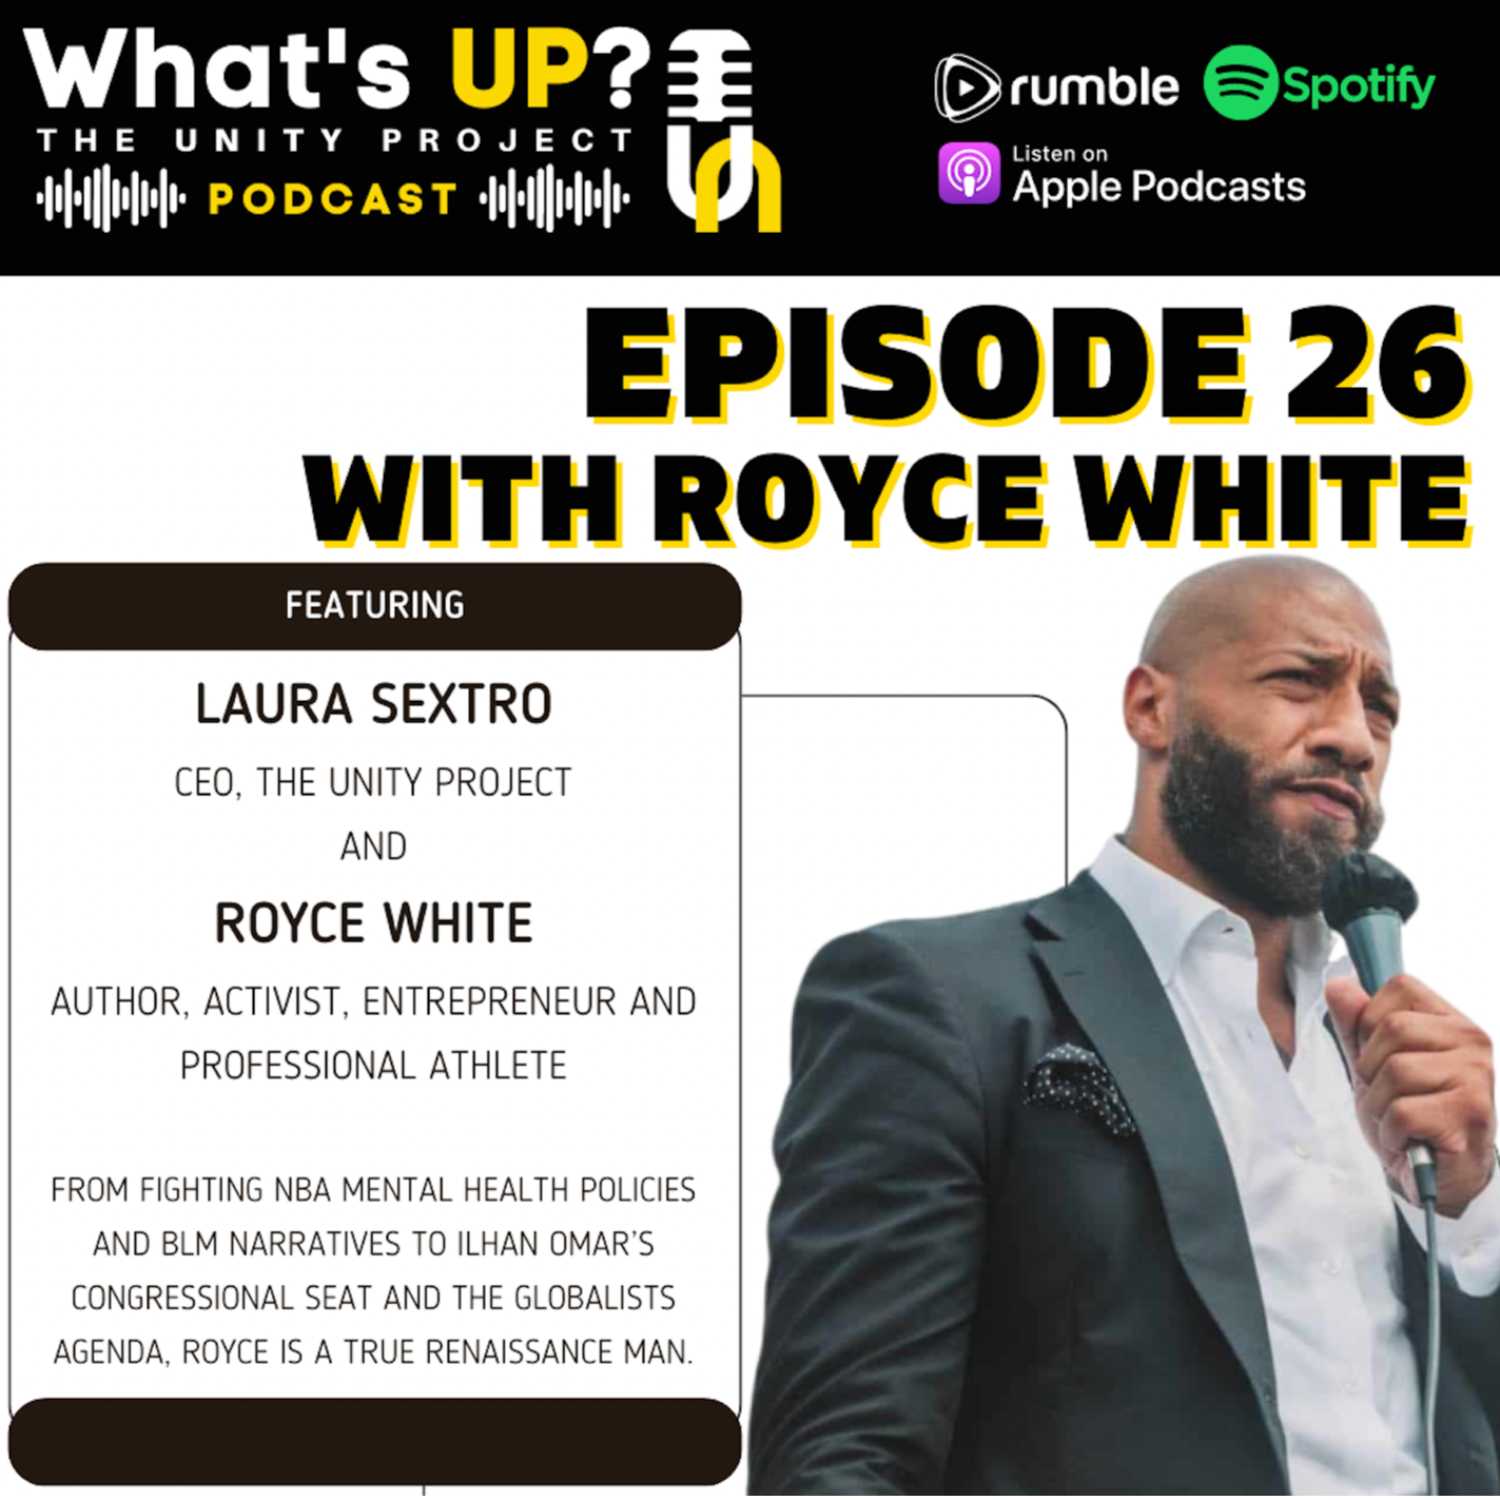 Ep. 26: Unity Project Podcast w/ Royce White From fighting NBA mental health policies and BLM narratives to Ilhan Omar’s congressional seat and the globalists agenda, Royce is a true Renaissance Man